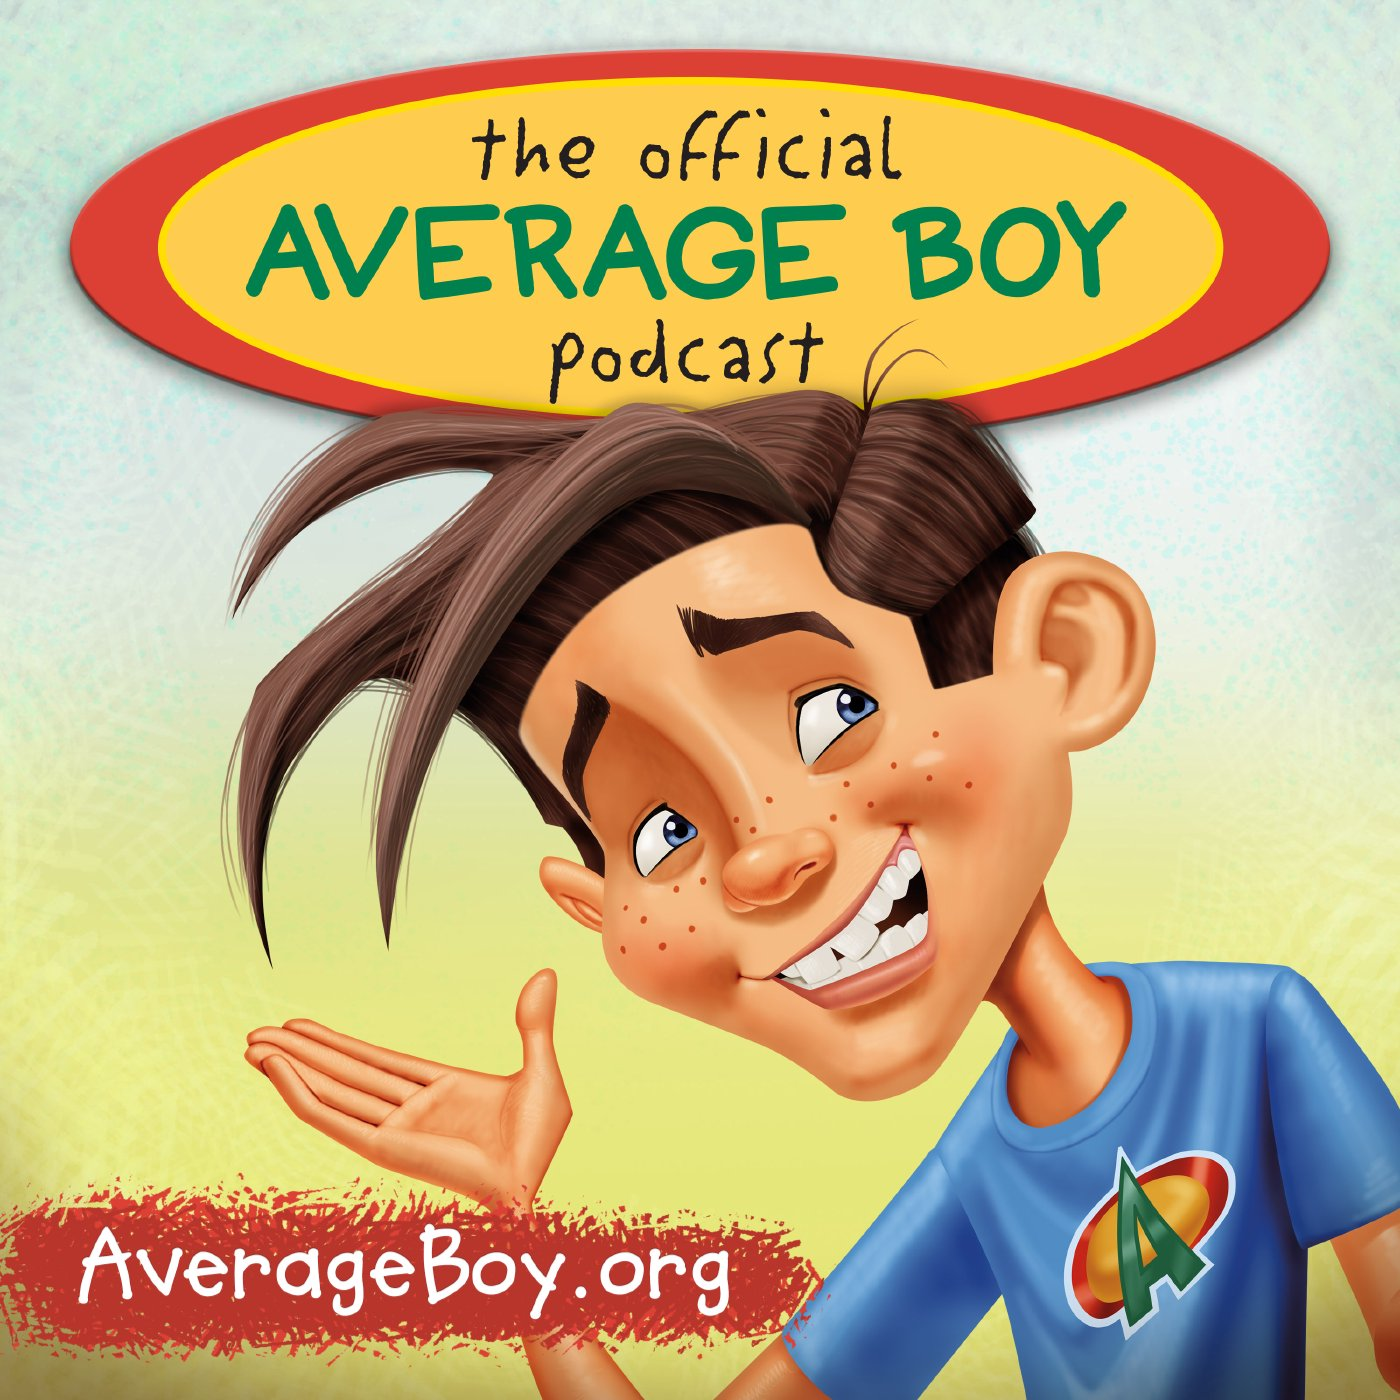 The Official Average Boy Podcast #31 on Humility